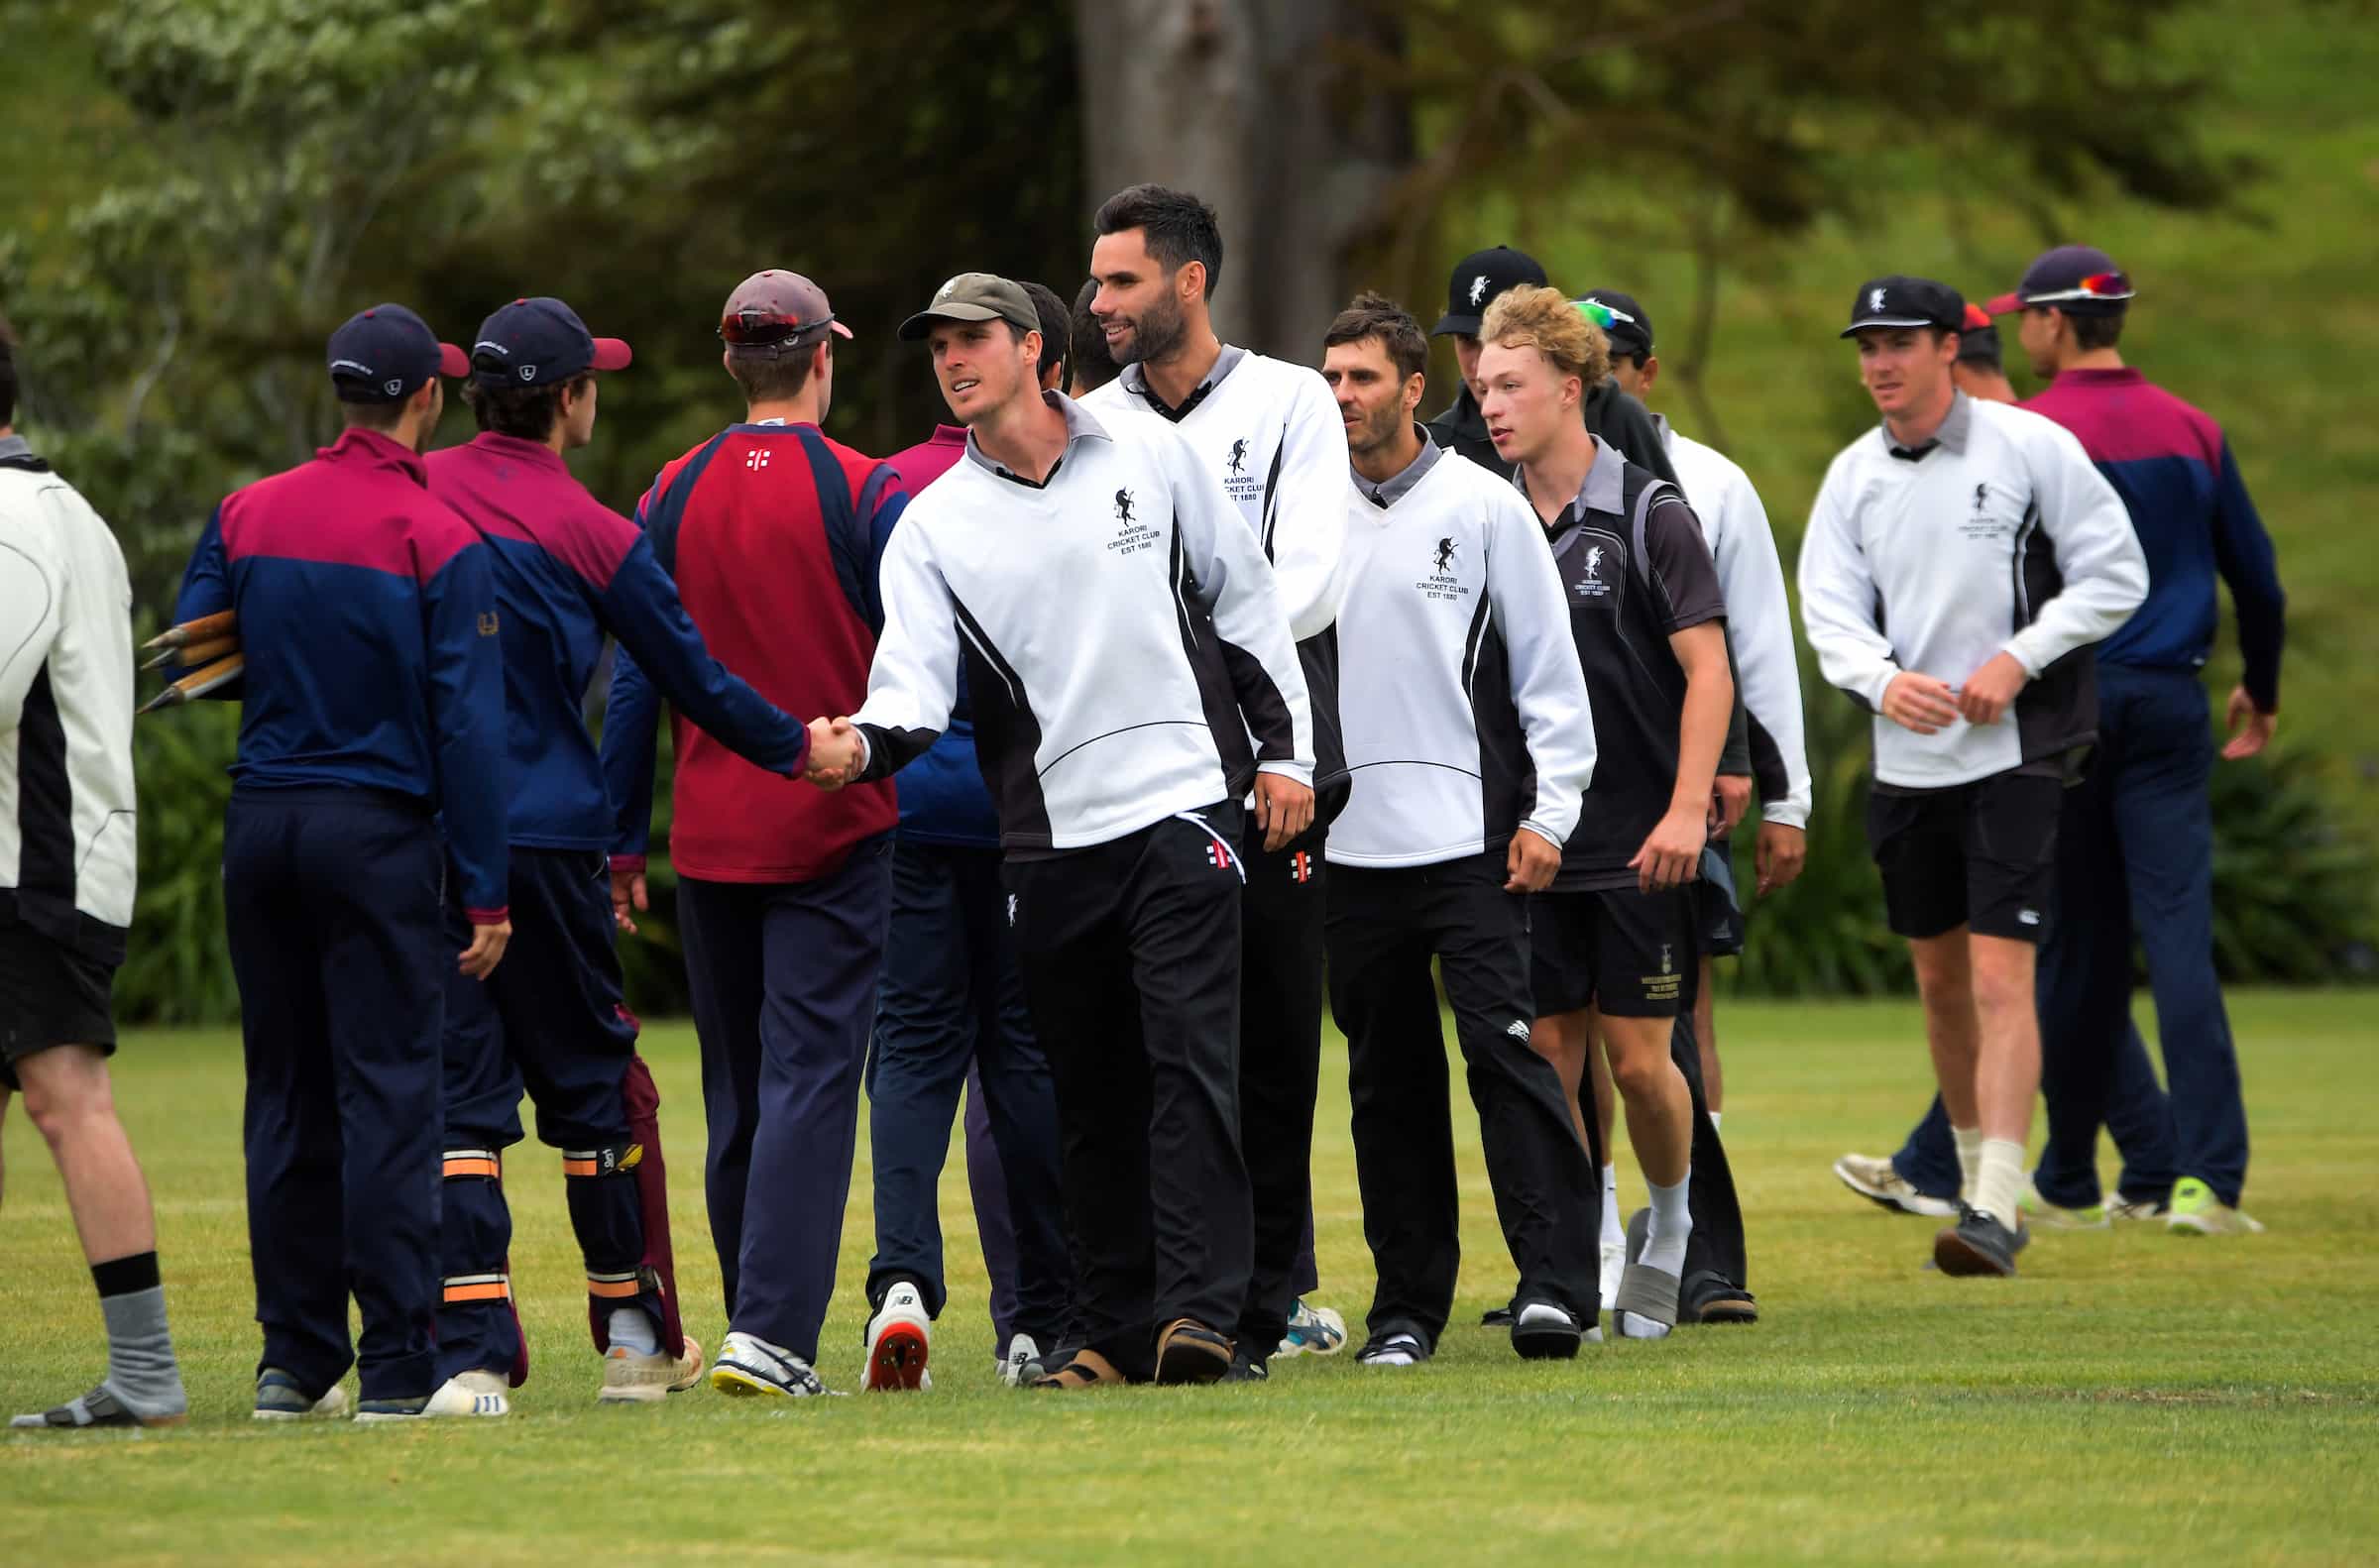 Action from the Premier T20 Cup Wellington men's twenty20 cricket match between Eastern Suburbs and Karori at Trentham Memorial Park in Upper Hutt, New Zealand on Saturday, 23 January 2021. Photo: Dave Lintott / lintottphoto.co.nz